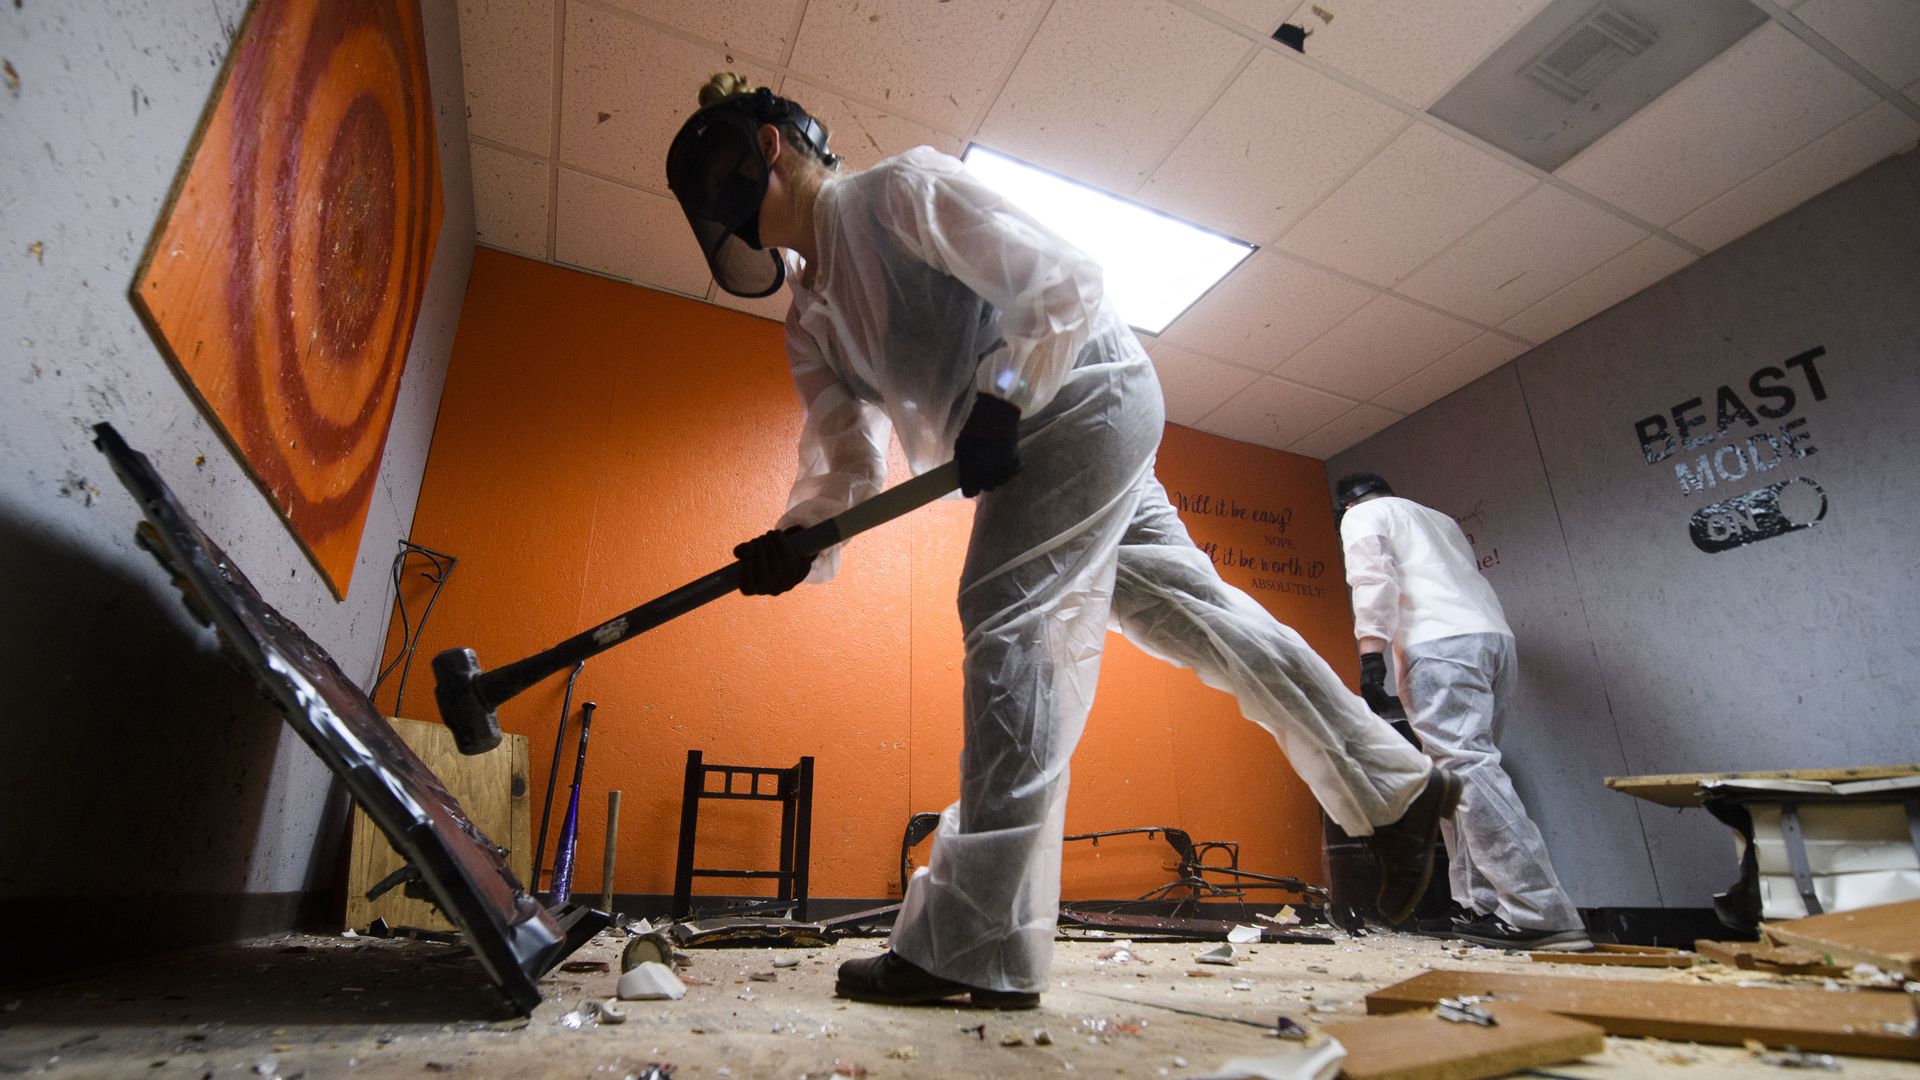 Erika Renau uses sledgehammer during a therapy session in a rage room at Smash RX on February 26, 2021 in Westlake Village, California. (Photo by PATRICK T. FALLON/AFP via Getty Images)  